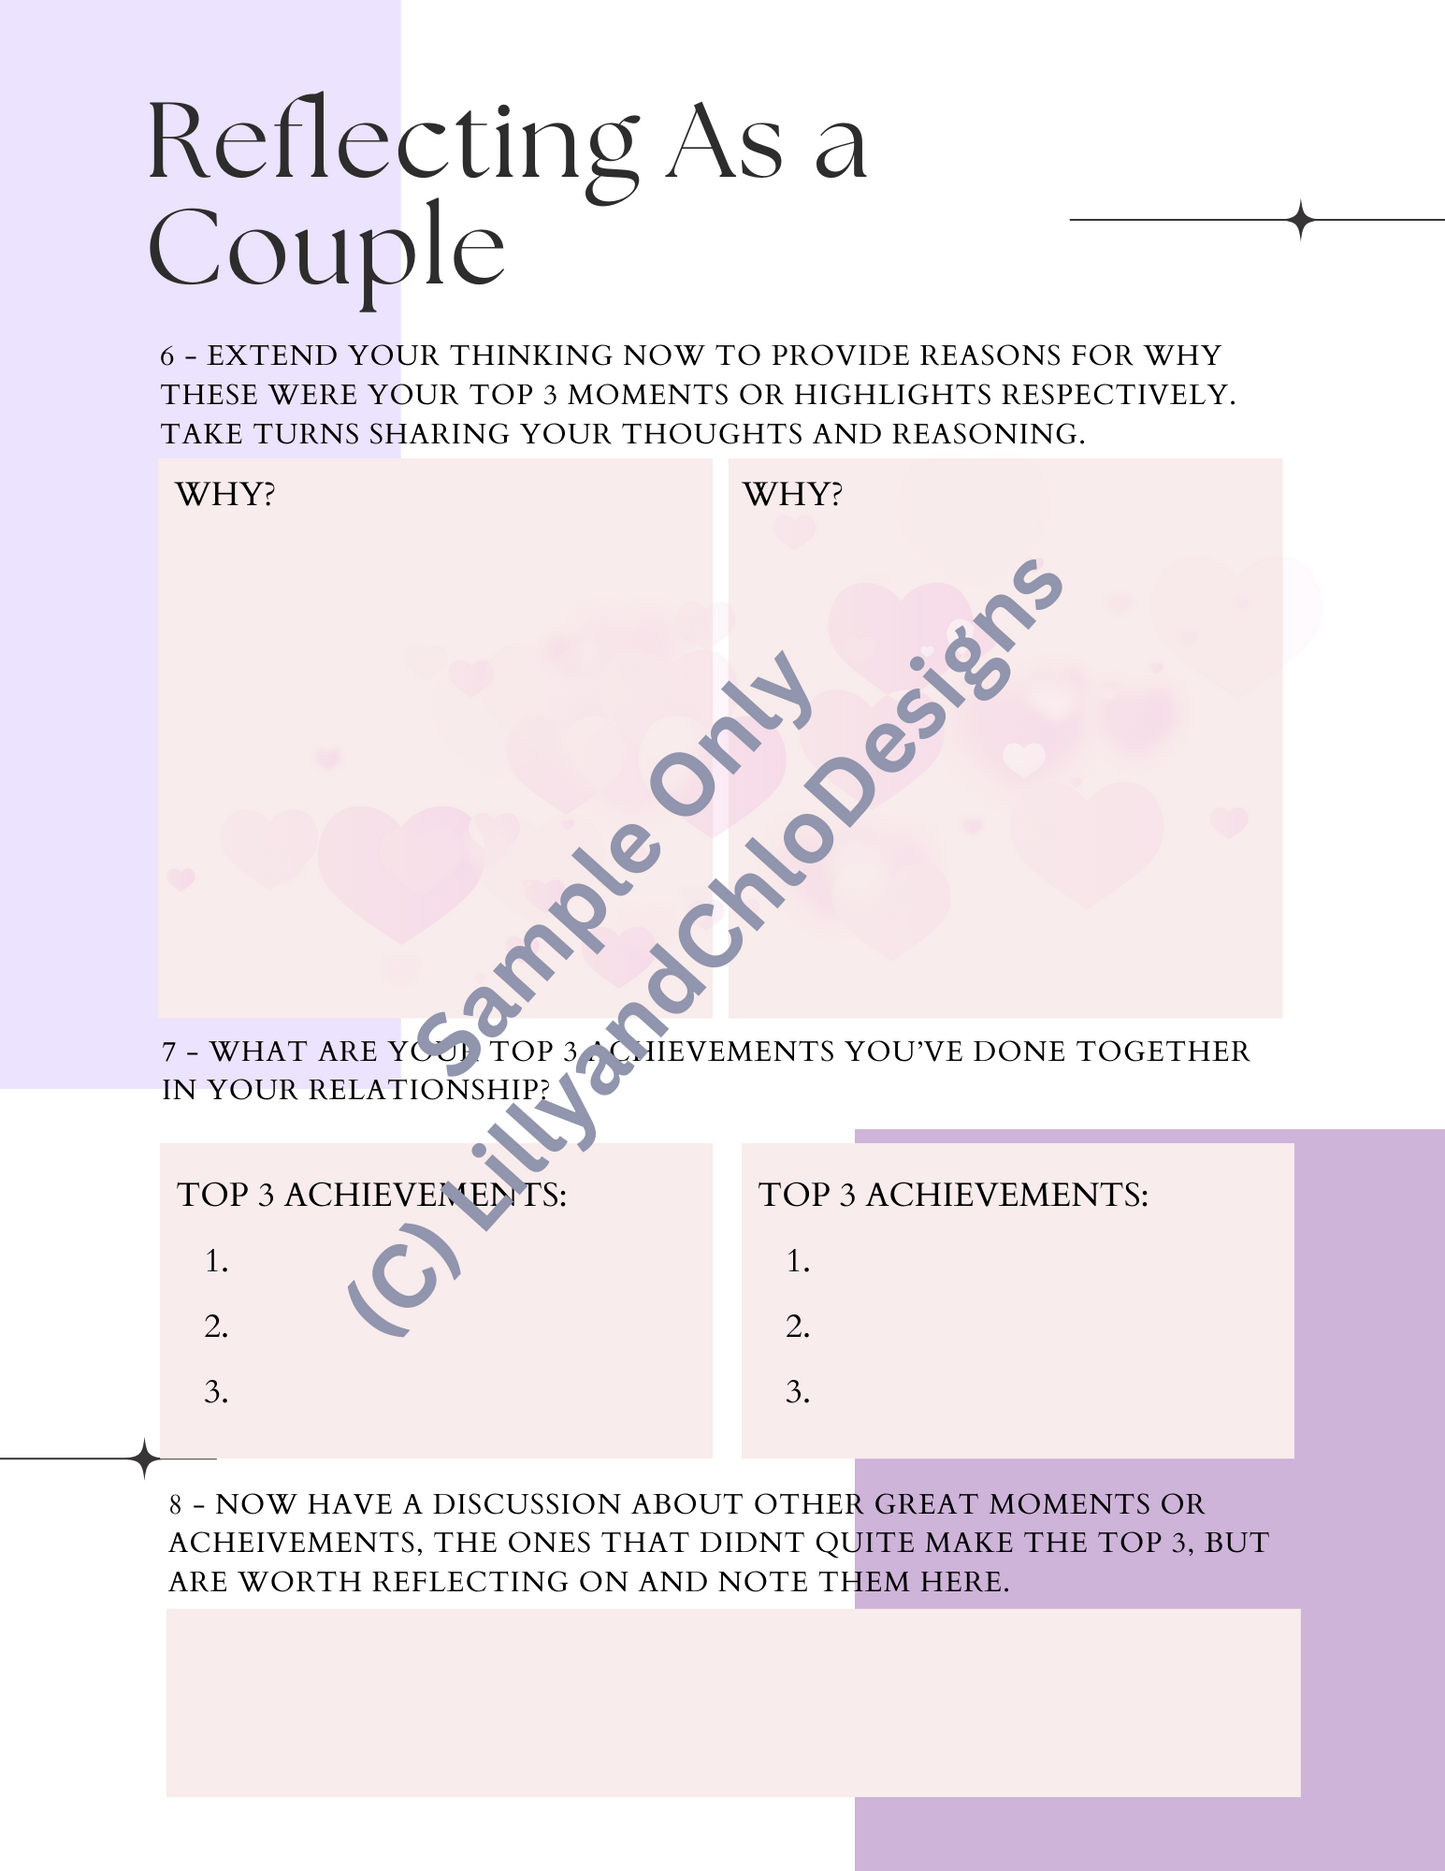 Couple’s Relationship Reflection Meeting Toolkit - Editable & Printable pdf - Meeting Agenda and Notes